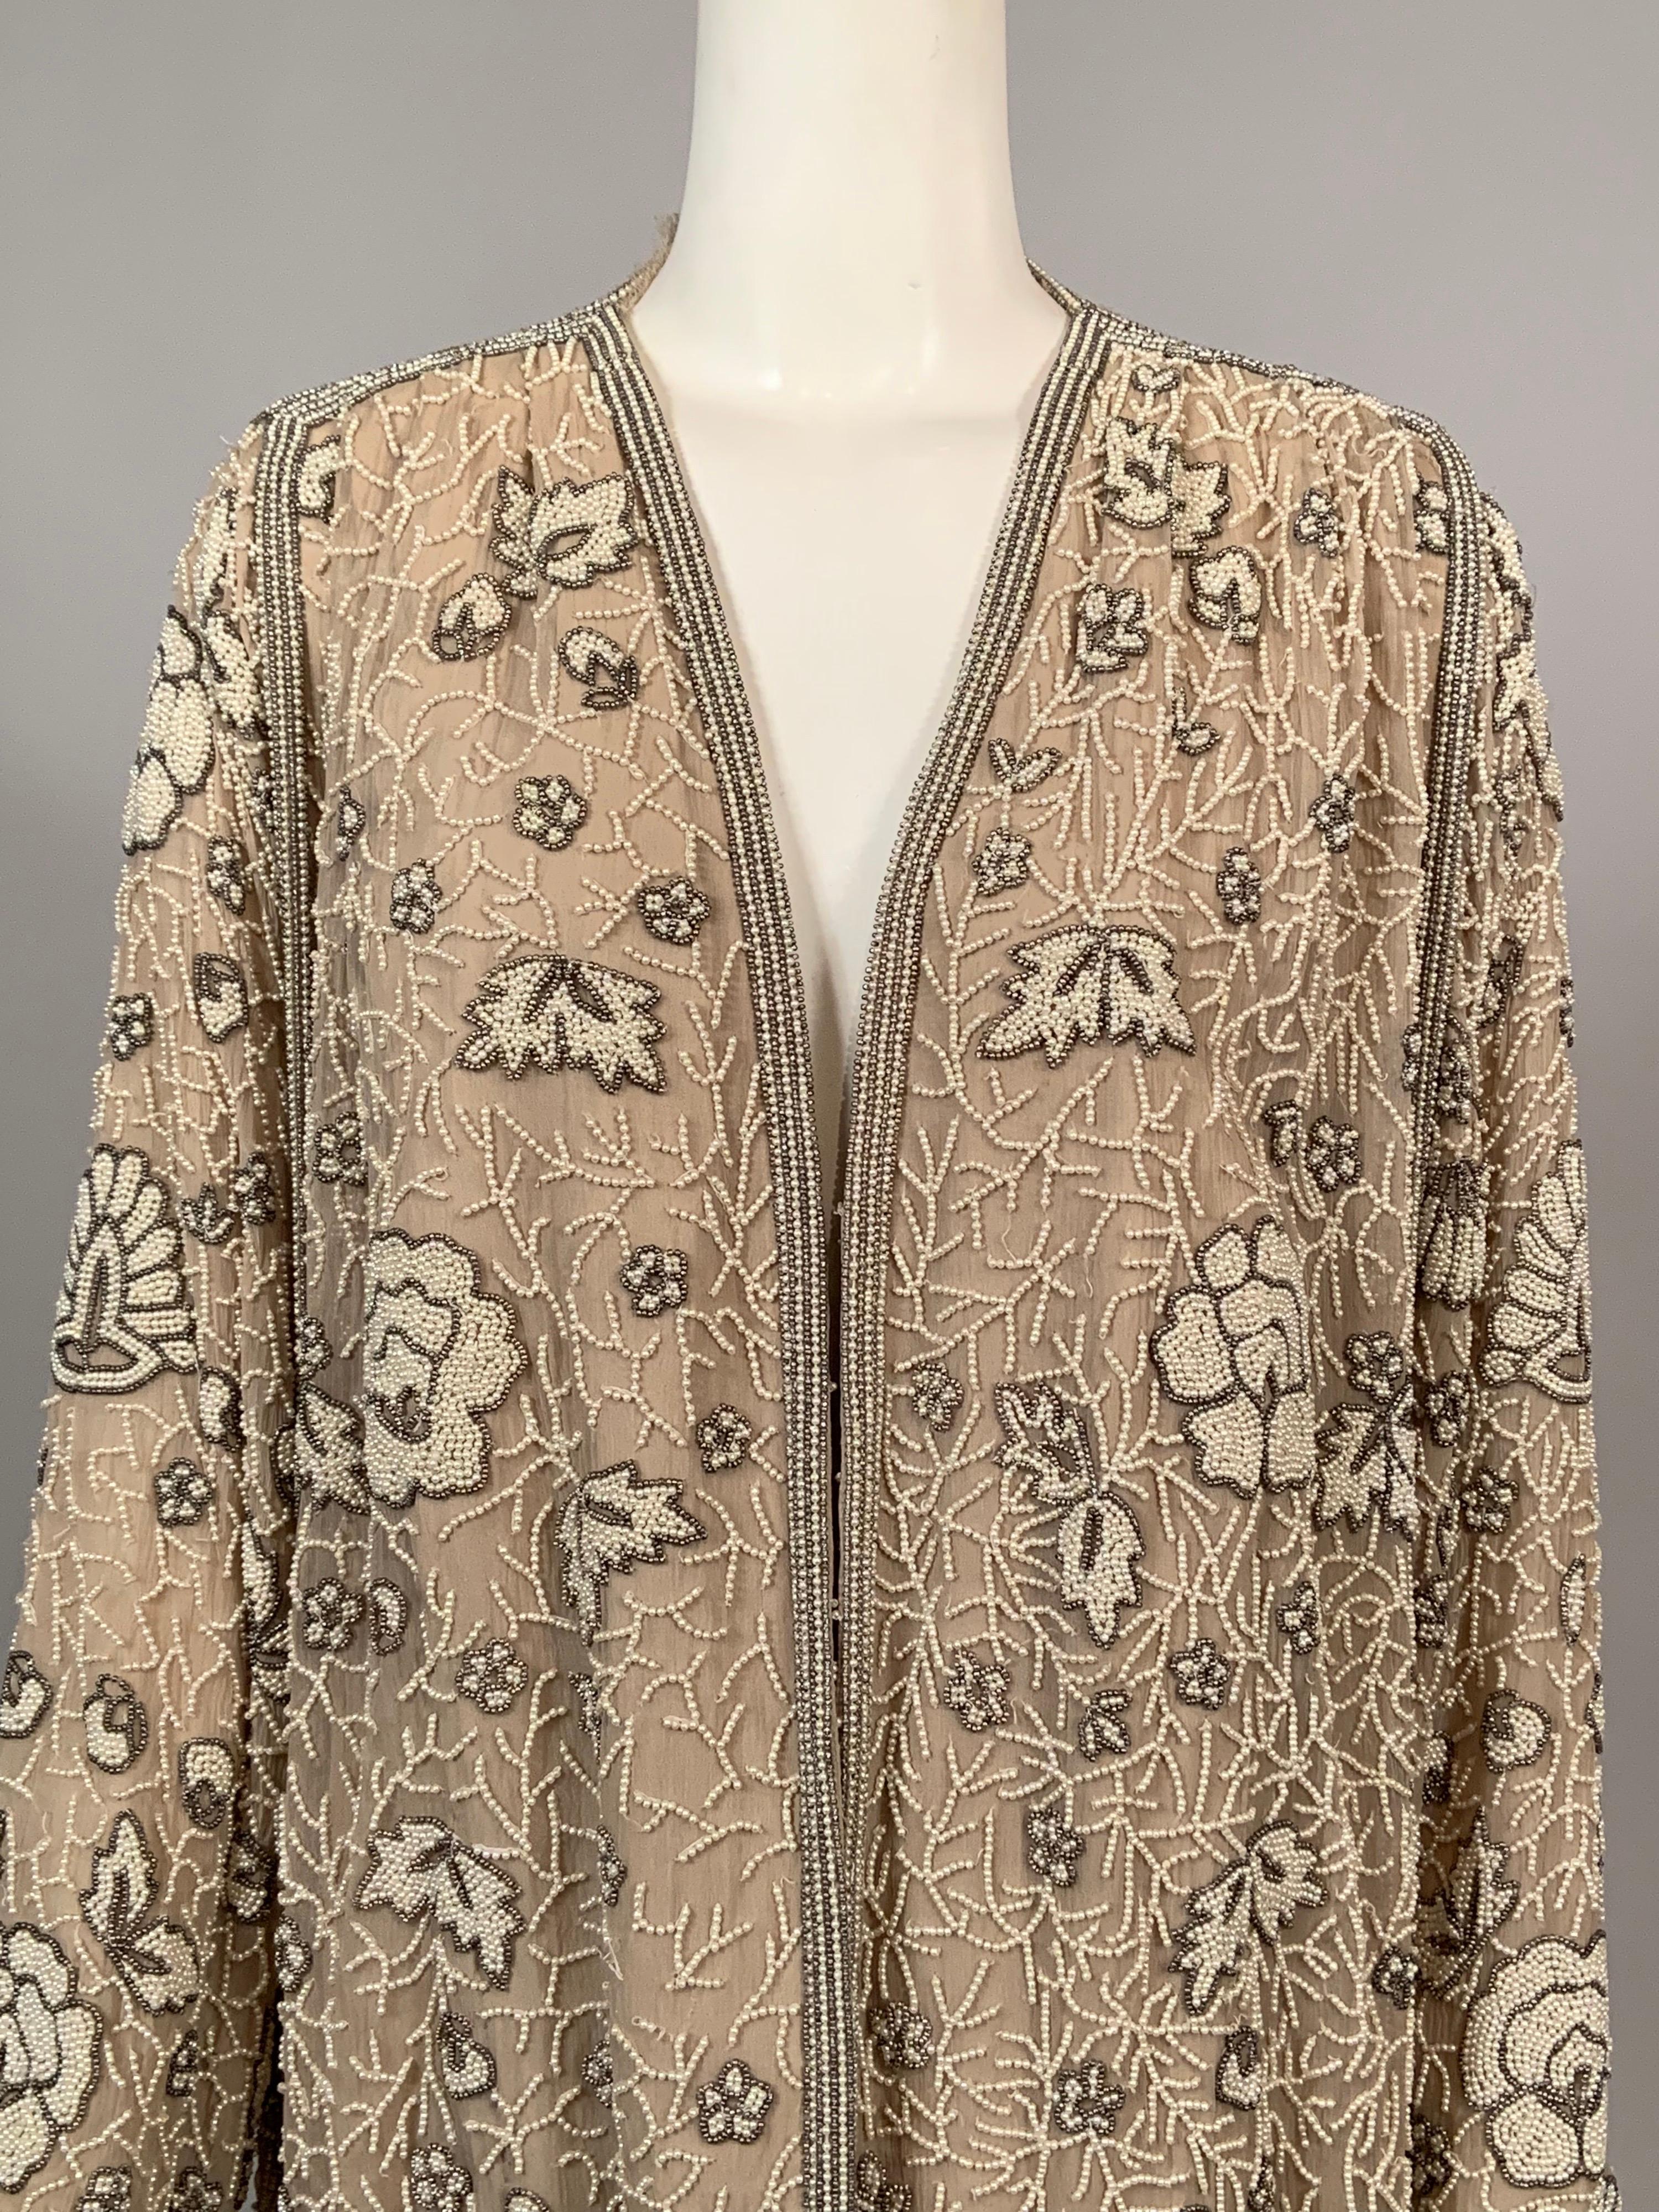 Pearl Beaded Silk Chiffon Evening Coat In Excellent Condition For Sale In New Hope, PA